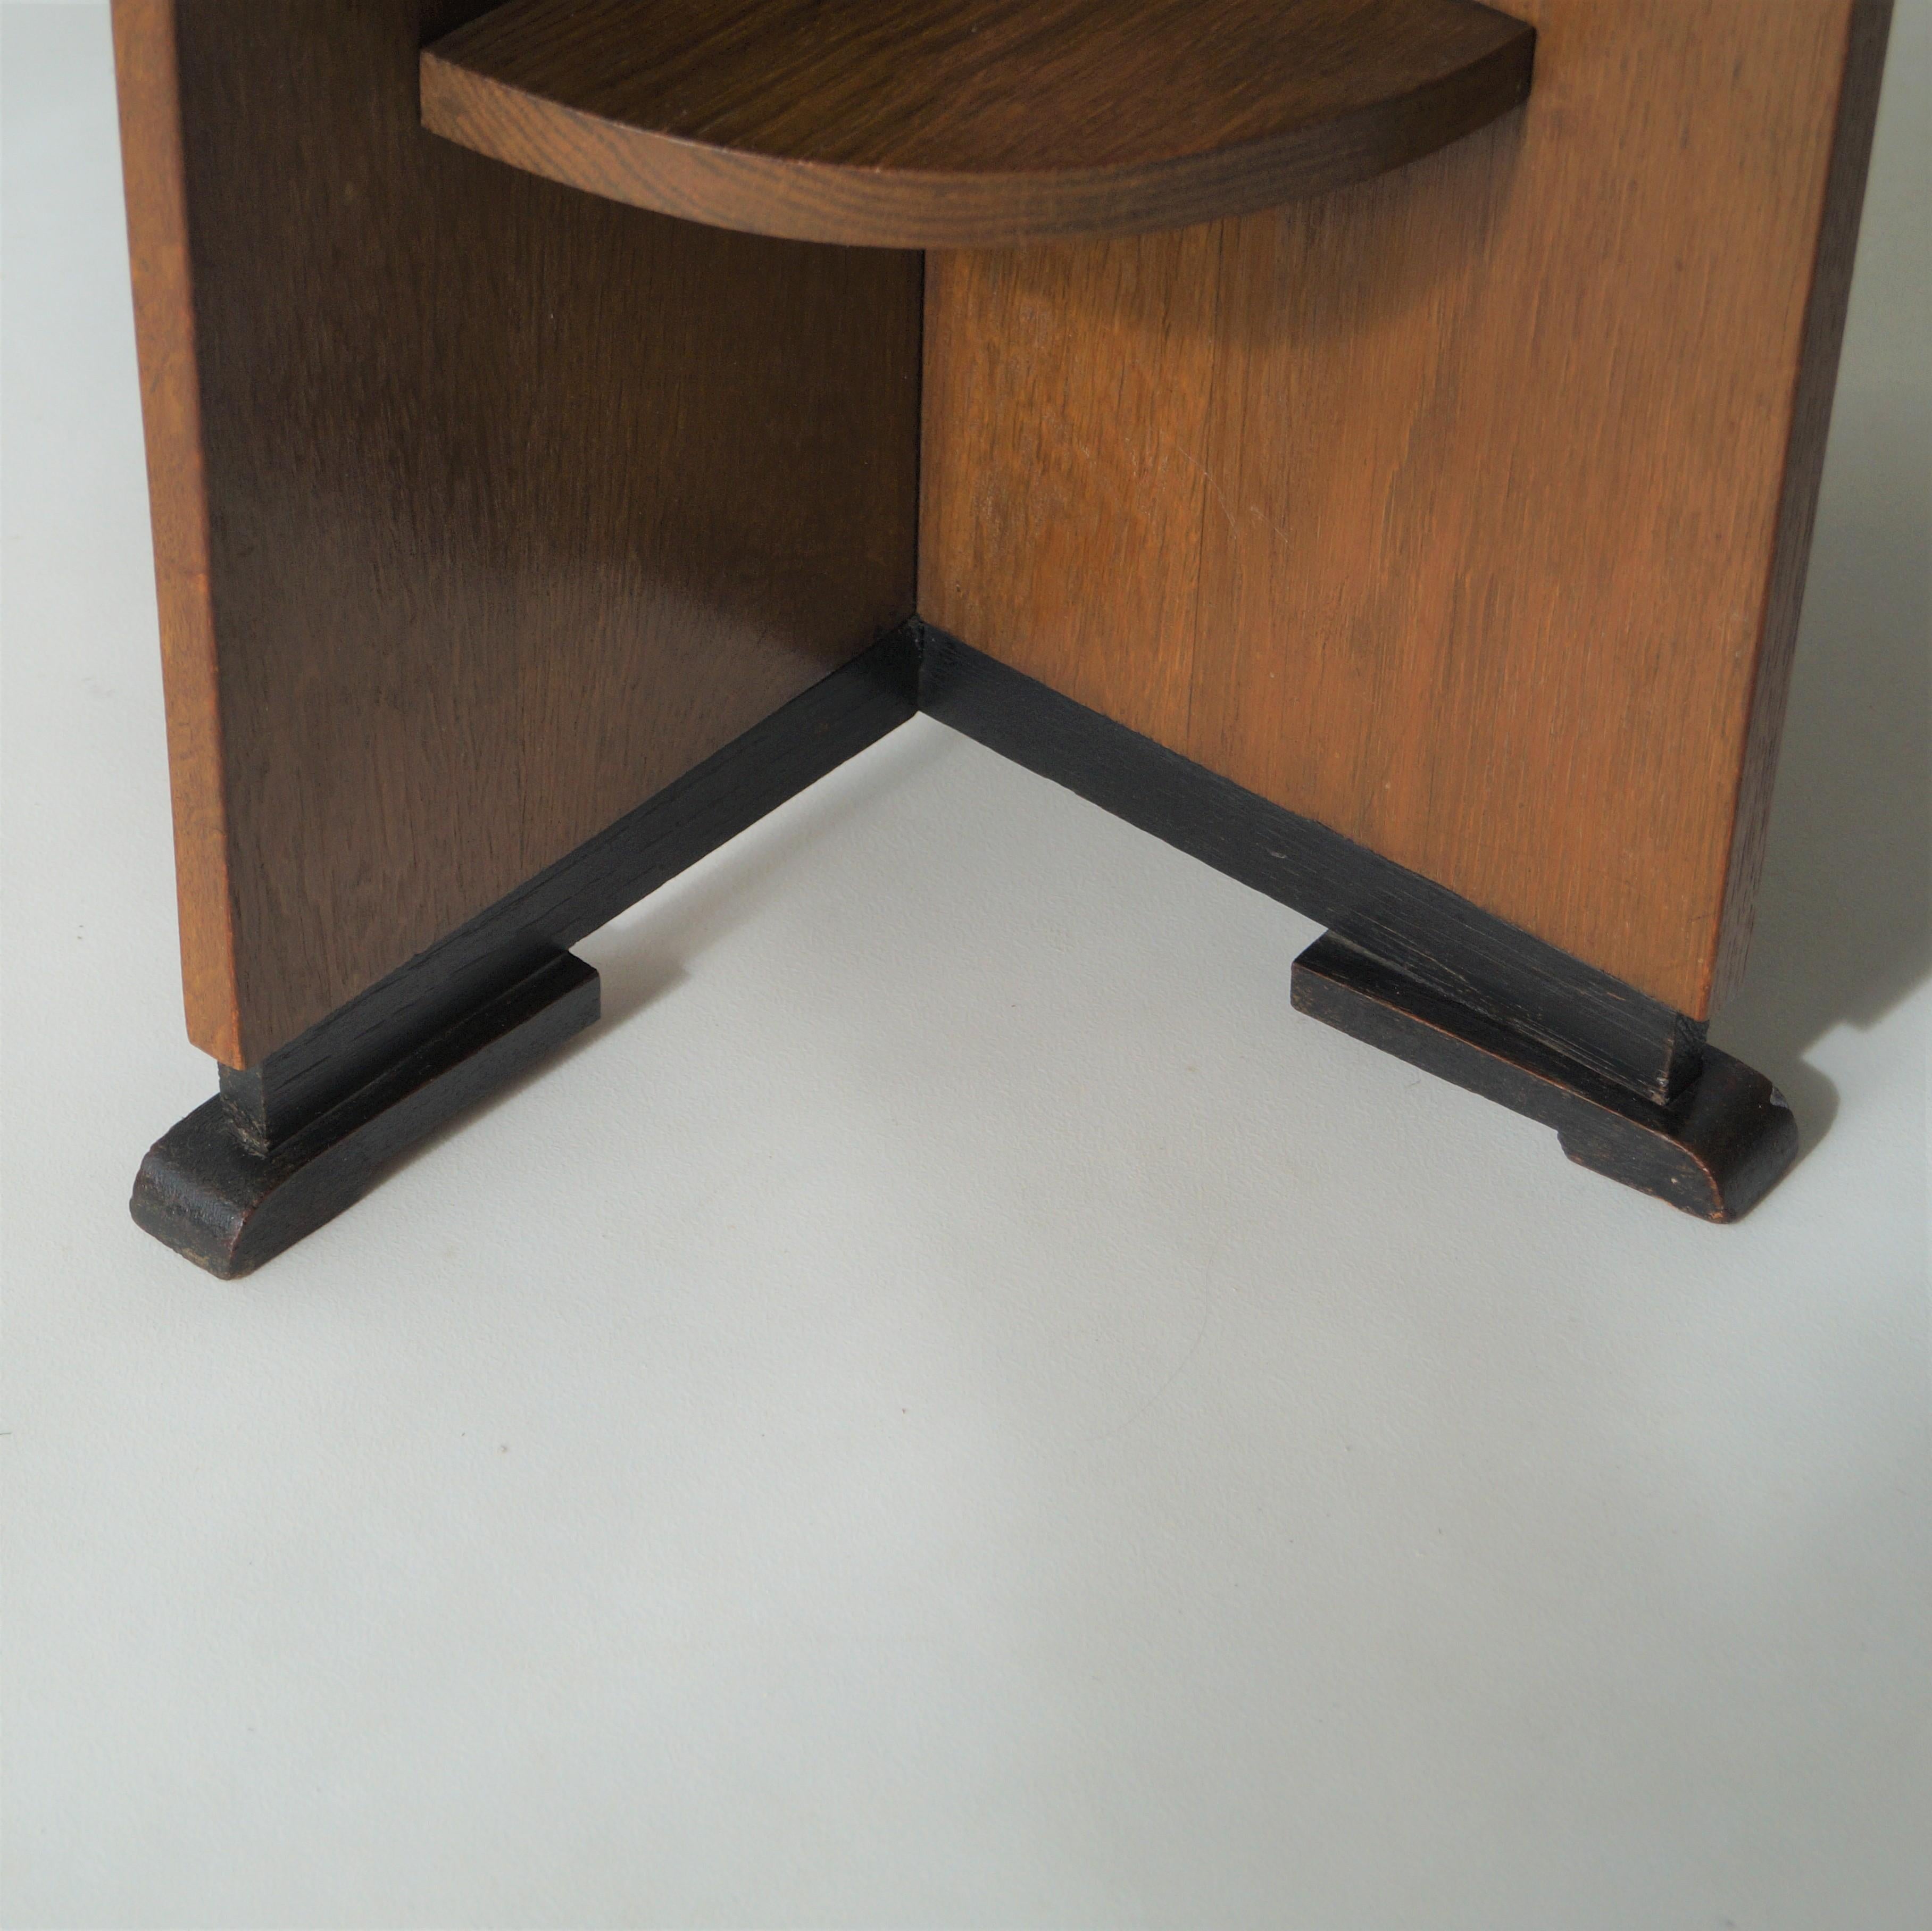 Dutch Art Deco (Haagse School) Occasional Table with Modernist Lines, 1920s 5